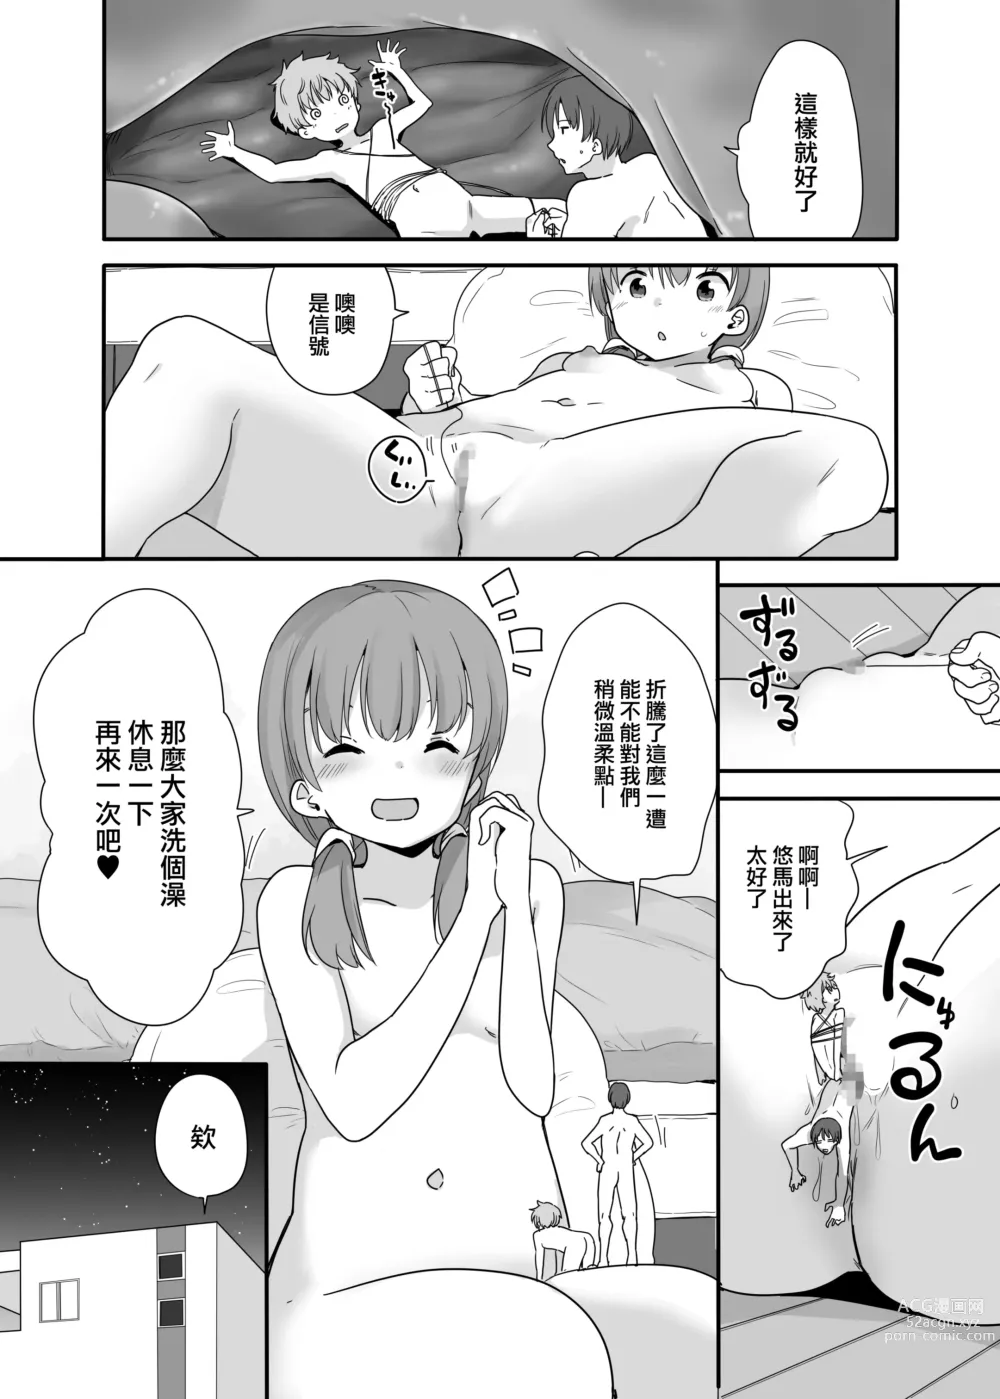 Page 25 of doujinshi Little Sister With Grande Everyday 3